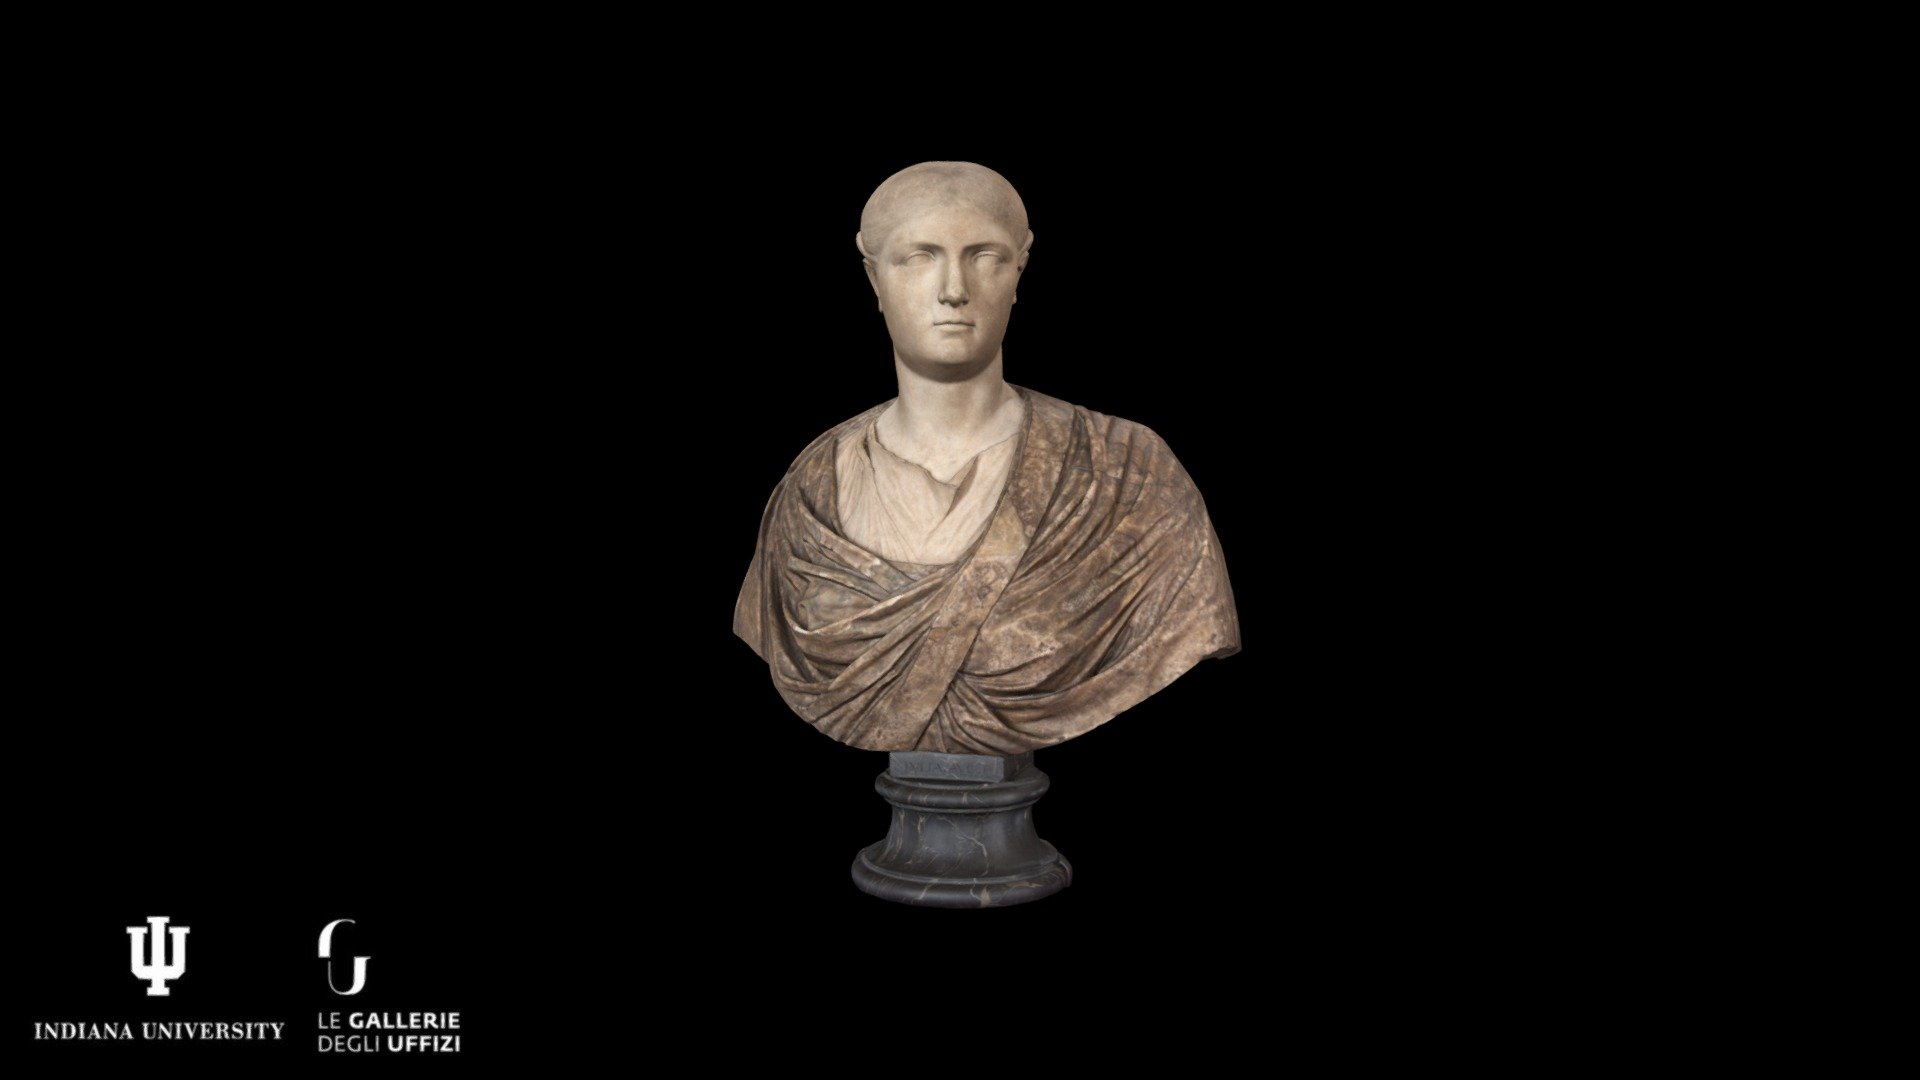 To see our entire collection, check out our website!

Identifiers

Title/Name: Unknown Female, so-called Roman Matron

Inventory: Inv. 1914 n. 96

Mansuelli: II.42

**Characteristics **

Format: Bust

Artist: Unknown

Date: Beginning of the 1st century CE

Materials: Greek Marble (head), Onyx (bust), Portoro (support)

Inscription: IVLIA, AVG F. (modern)

Dimensions: H (total) 65 cm, (ancient) 45 cm

Paradata

Camera: Nikon D810 with Nikkor 24-85mm F/2.4-4 lens

Photographer: Matthew Brennan

Reconstruction Software: RealityCapture, ZBrush

Modeler: Matthew Brennan

Studi e Restauri Publication: n/a

Copyright 2017– Ministero dei Beni e delle Attivita’ Culturali e del Turismo – Gallerie degli Uffizi – Tutti i diritti riservati. All rights reserved 3d model